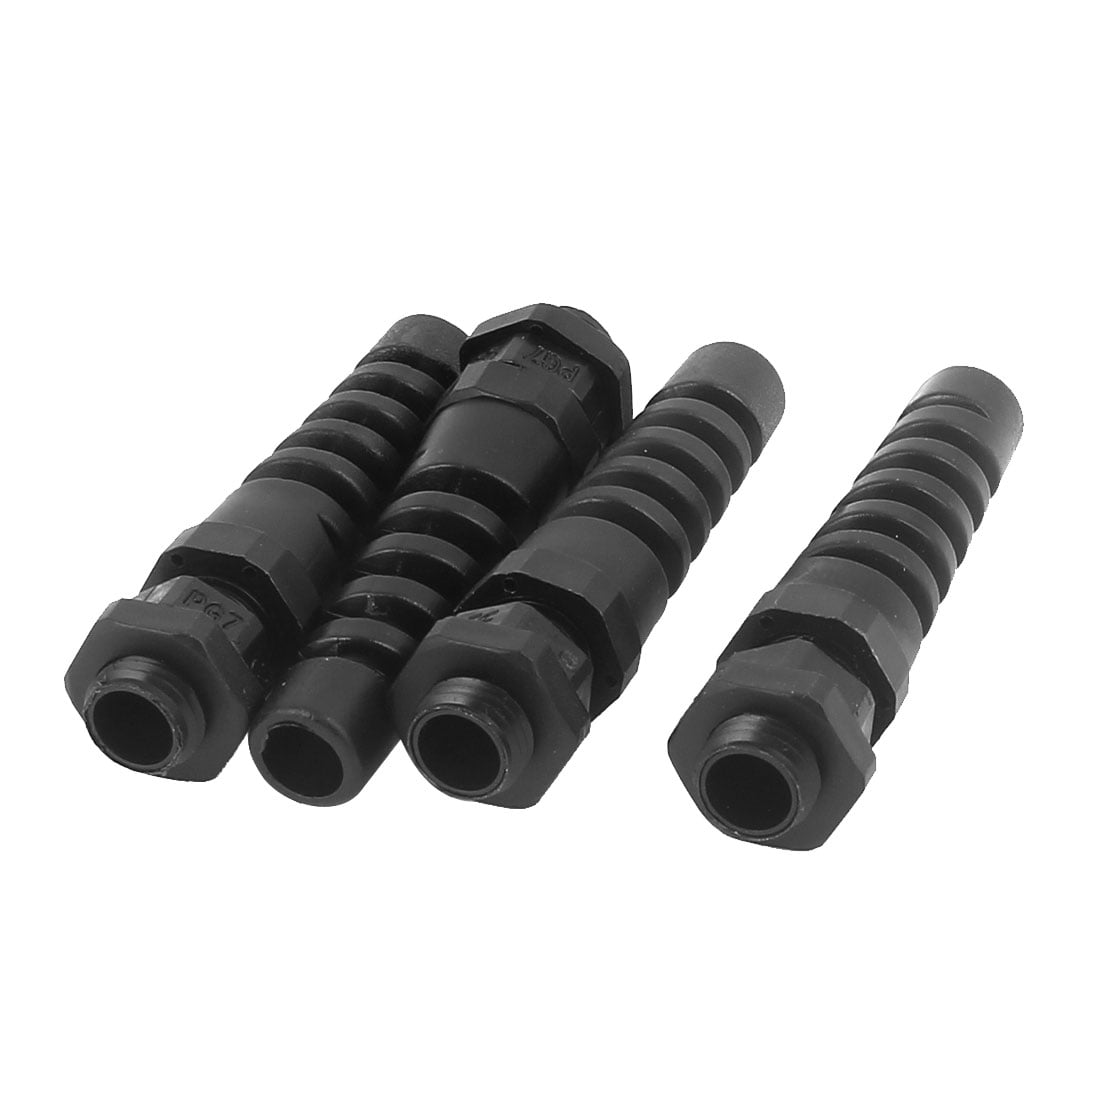 5PCS Gray Spiral Cable Gland PG7 Cable Range 3-6.5MM Nylon IP68 Waterproof 